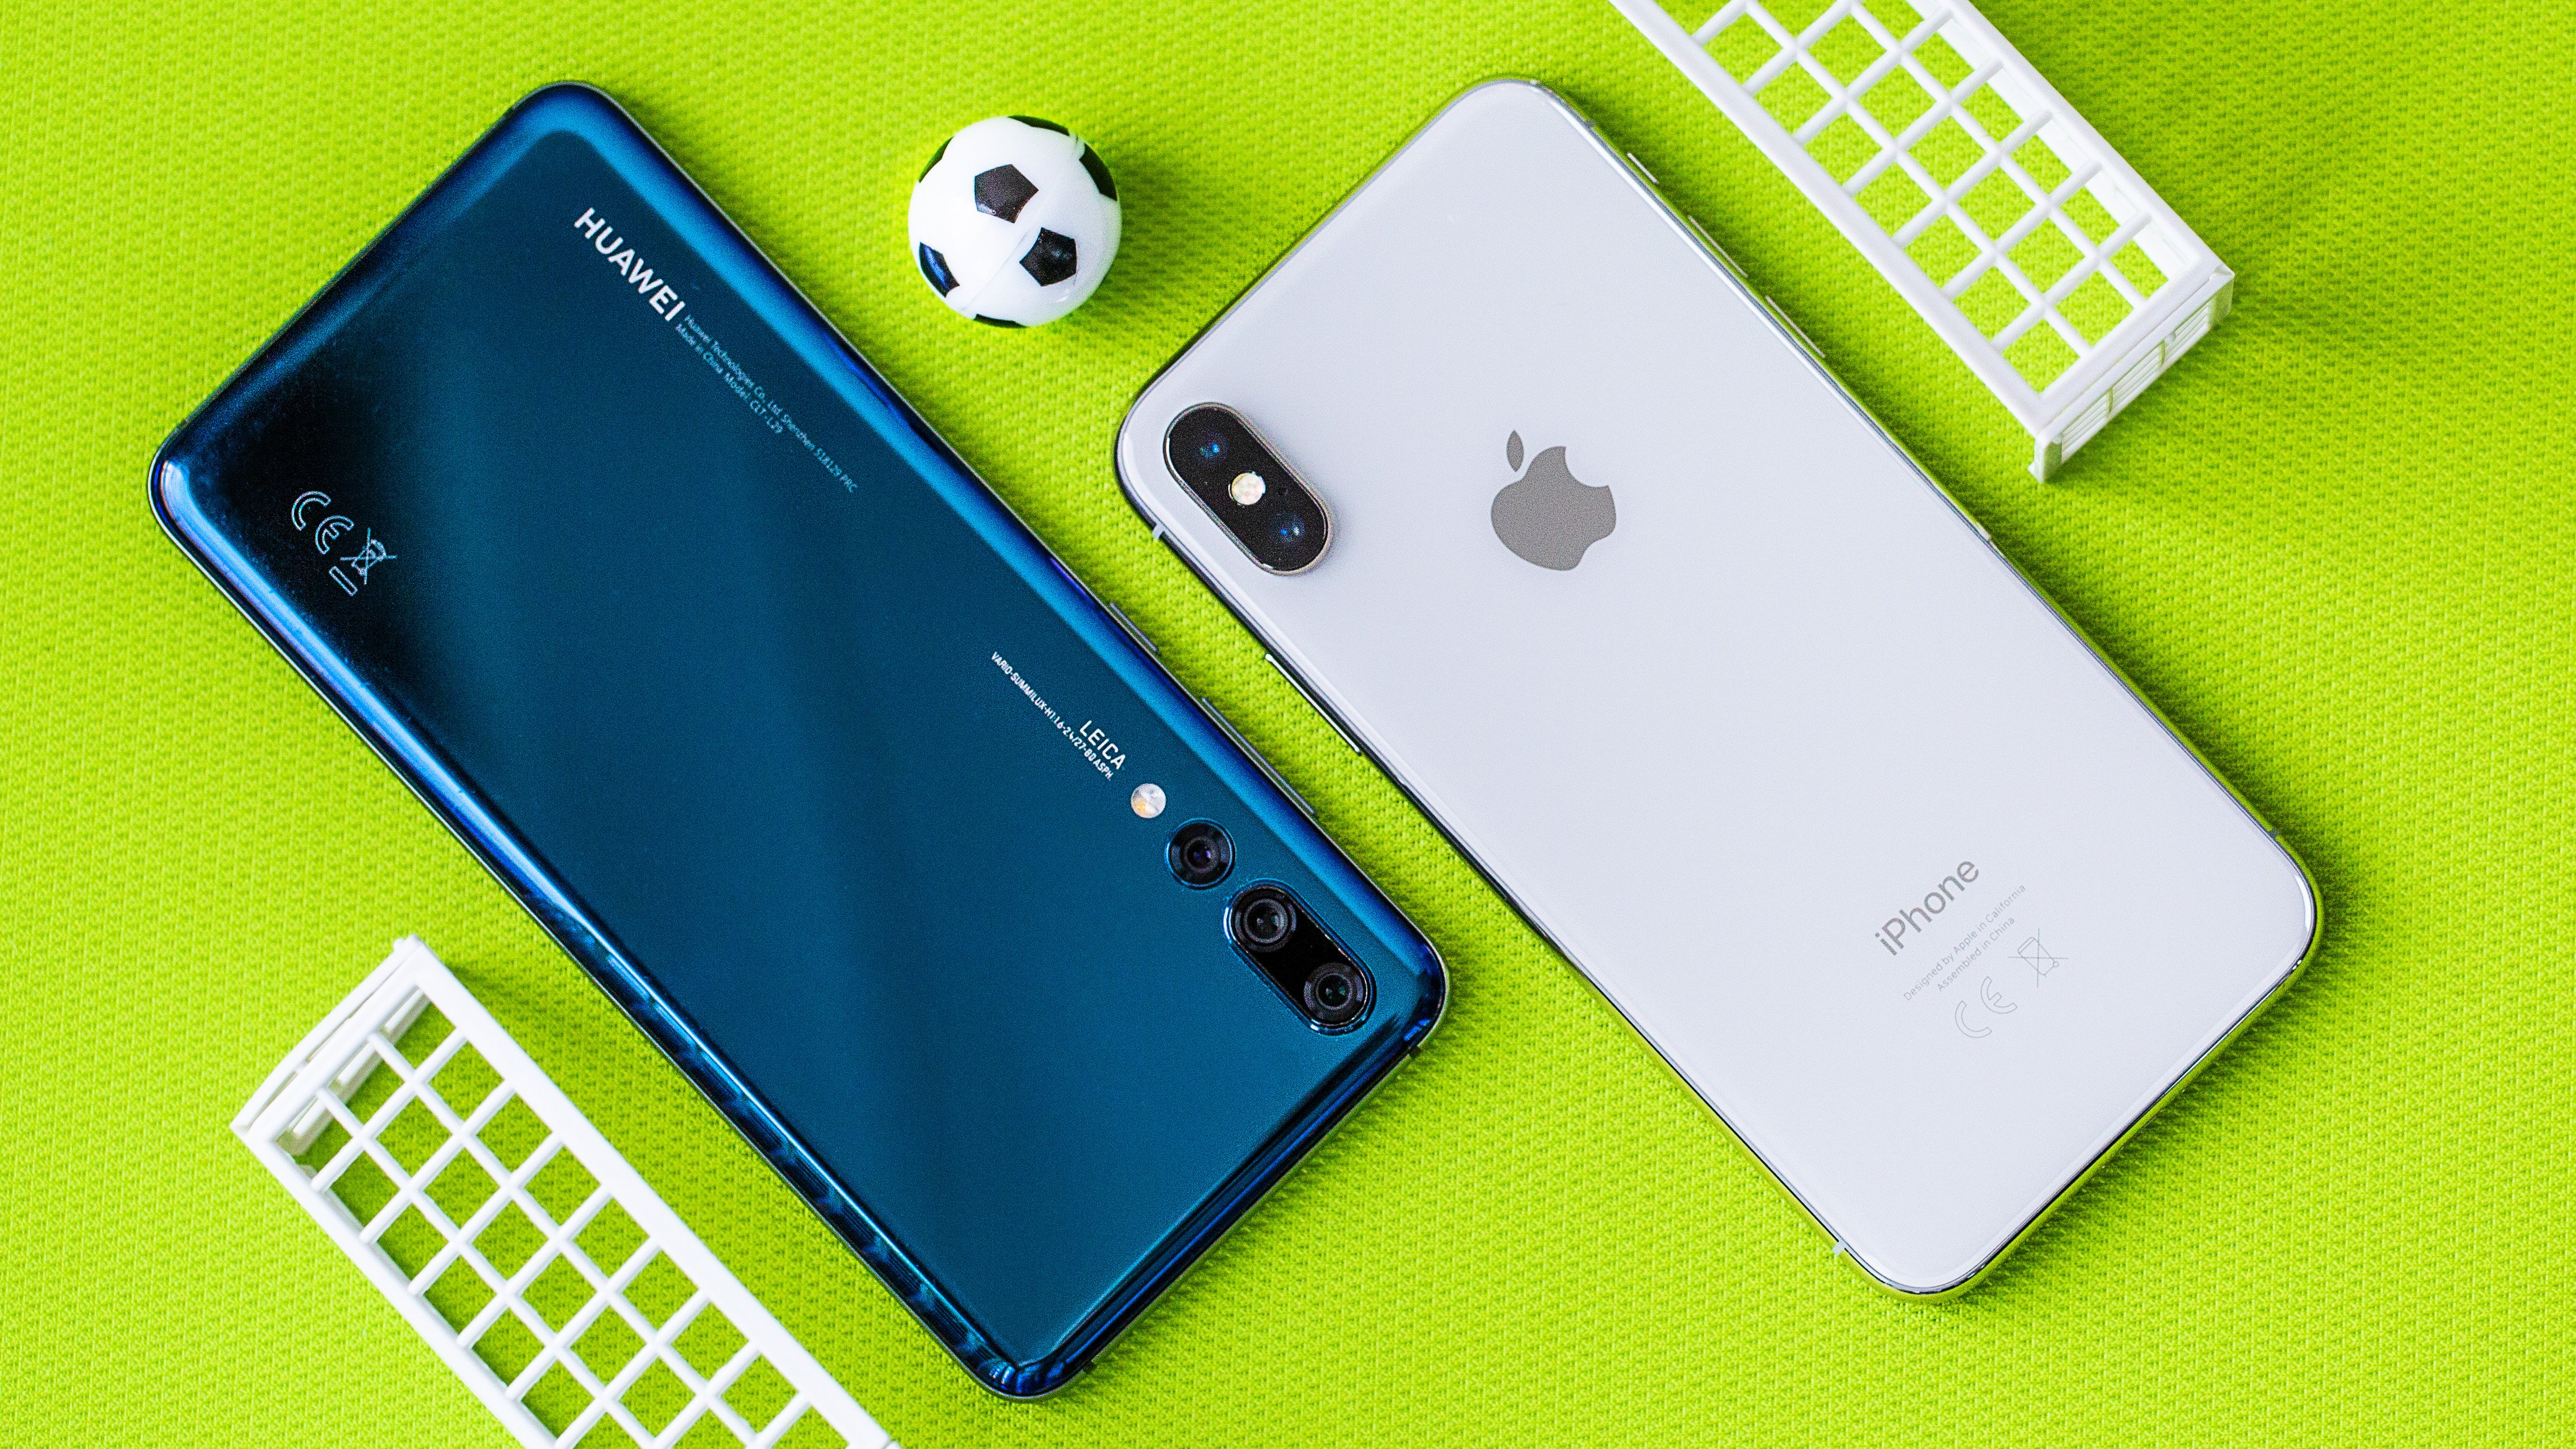 Cancel p20 reviews pro x iphone oder huawei v rate